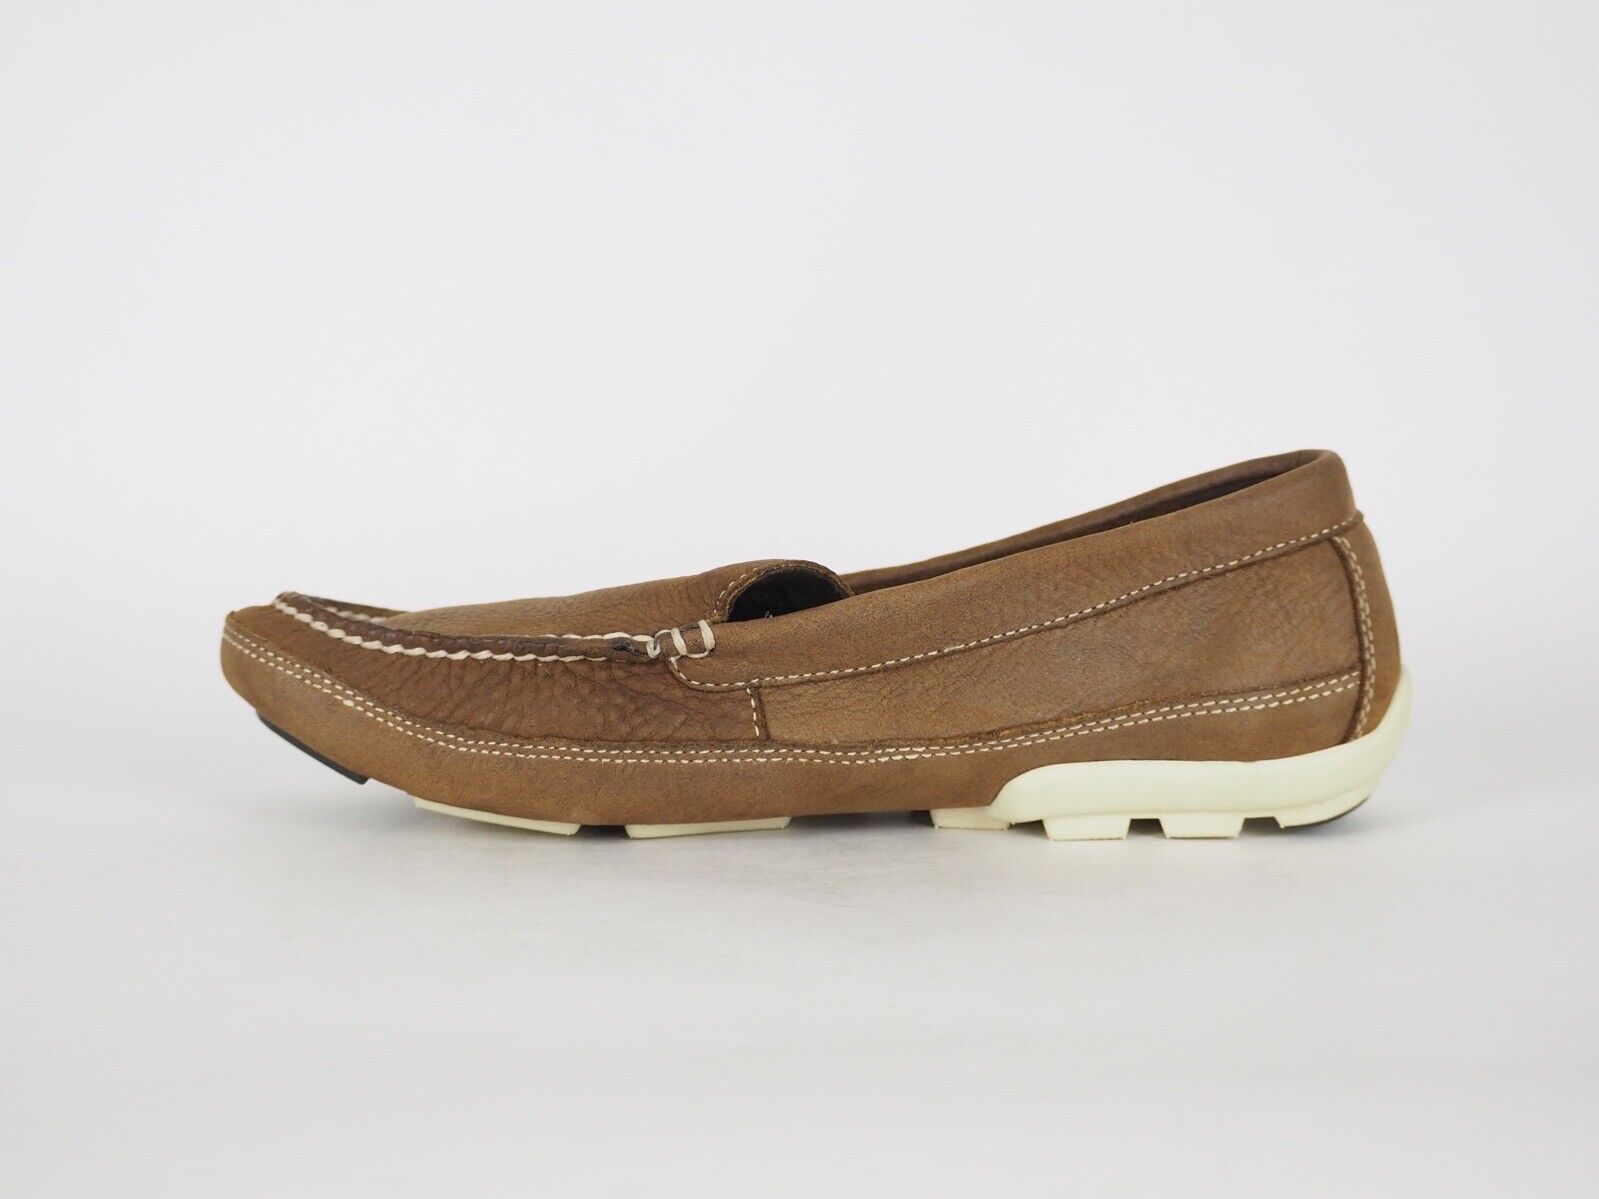 Mens Timberland Classic Lite 6332A Light Brown Leather Casual Slip On Boat Shoes